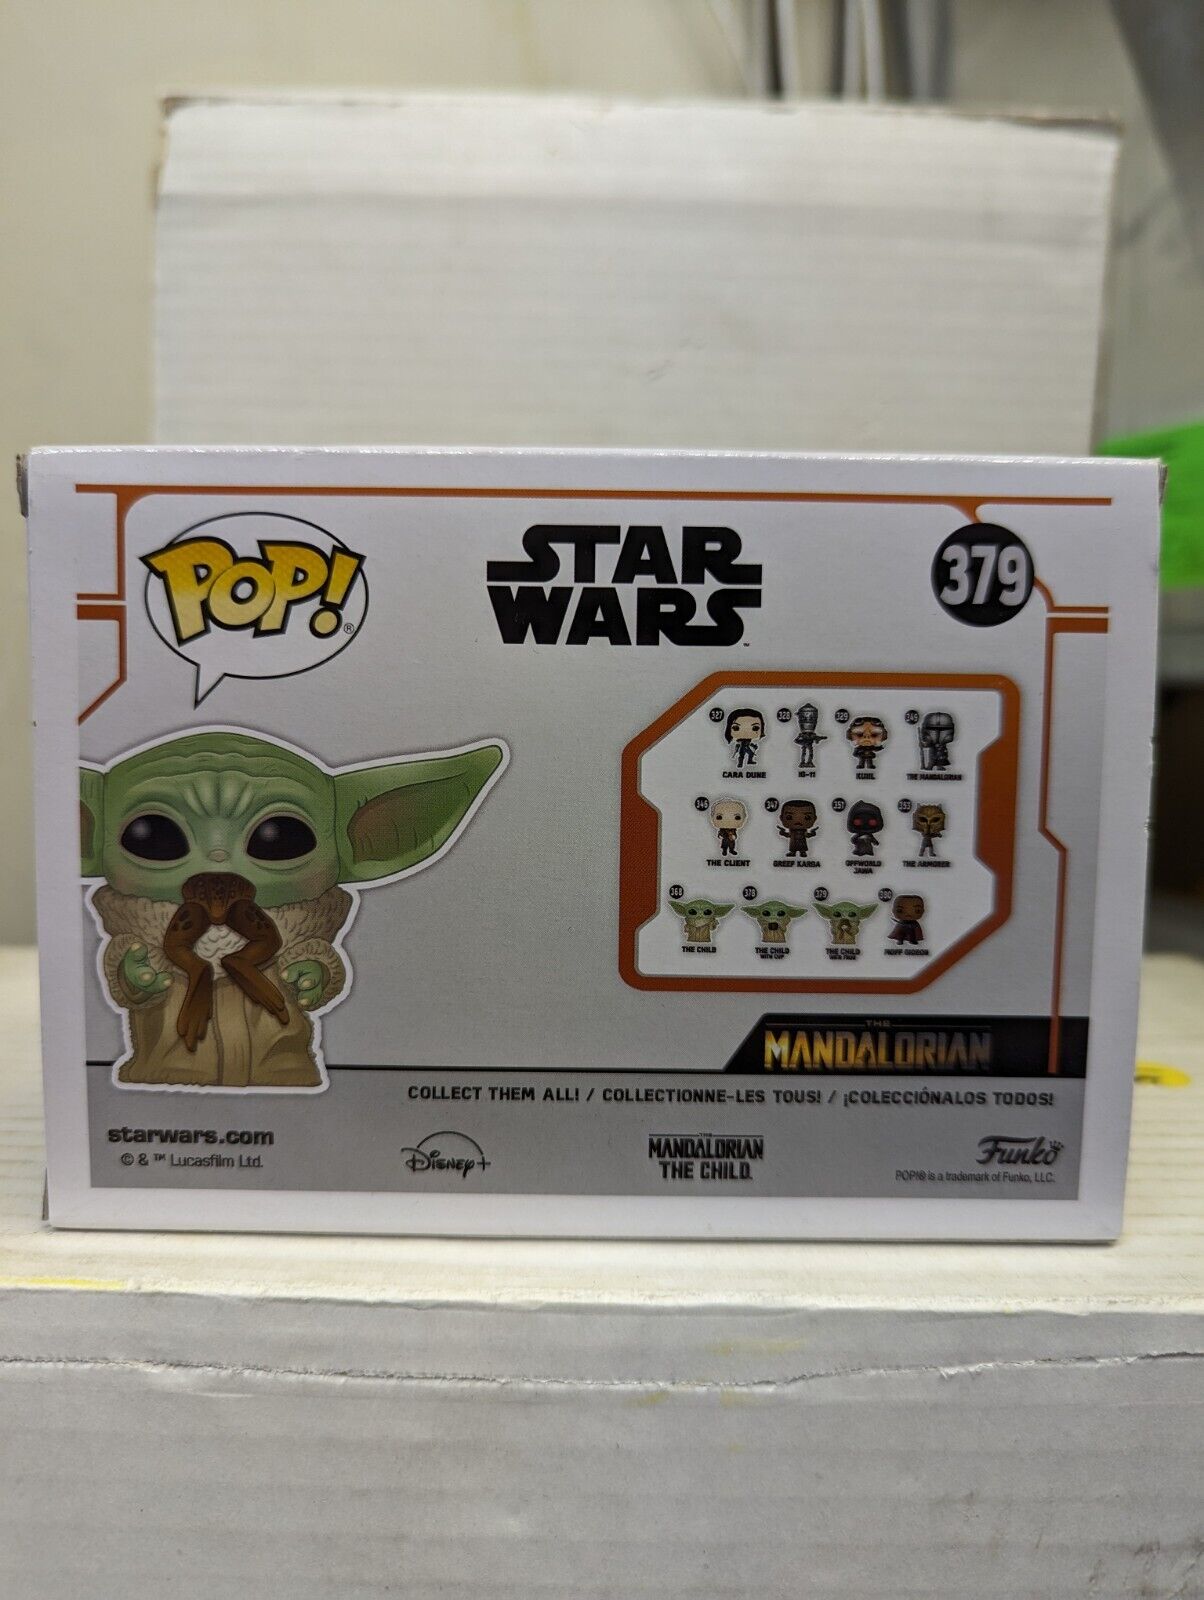 Funko Pop The Child With Frog 379 Star Wars